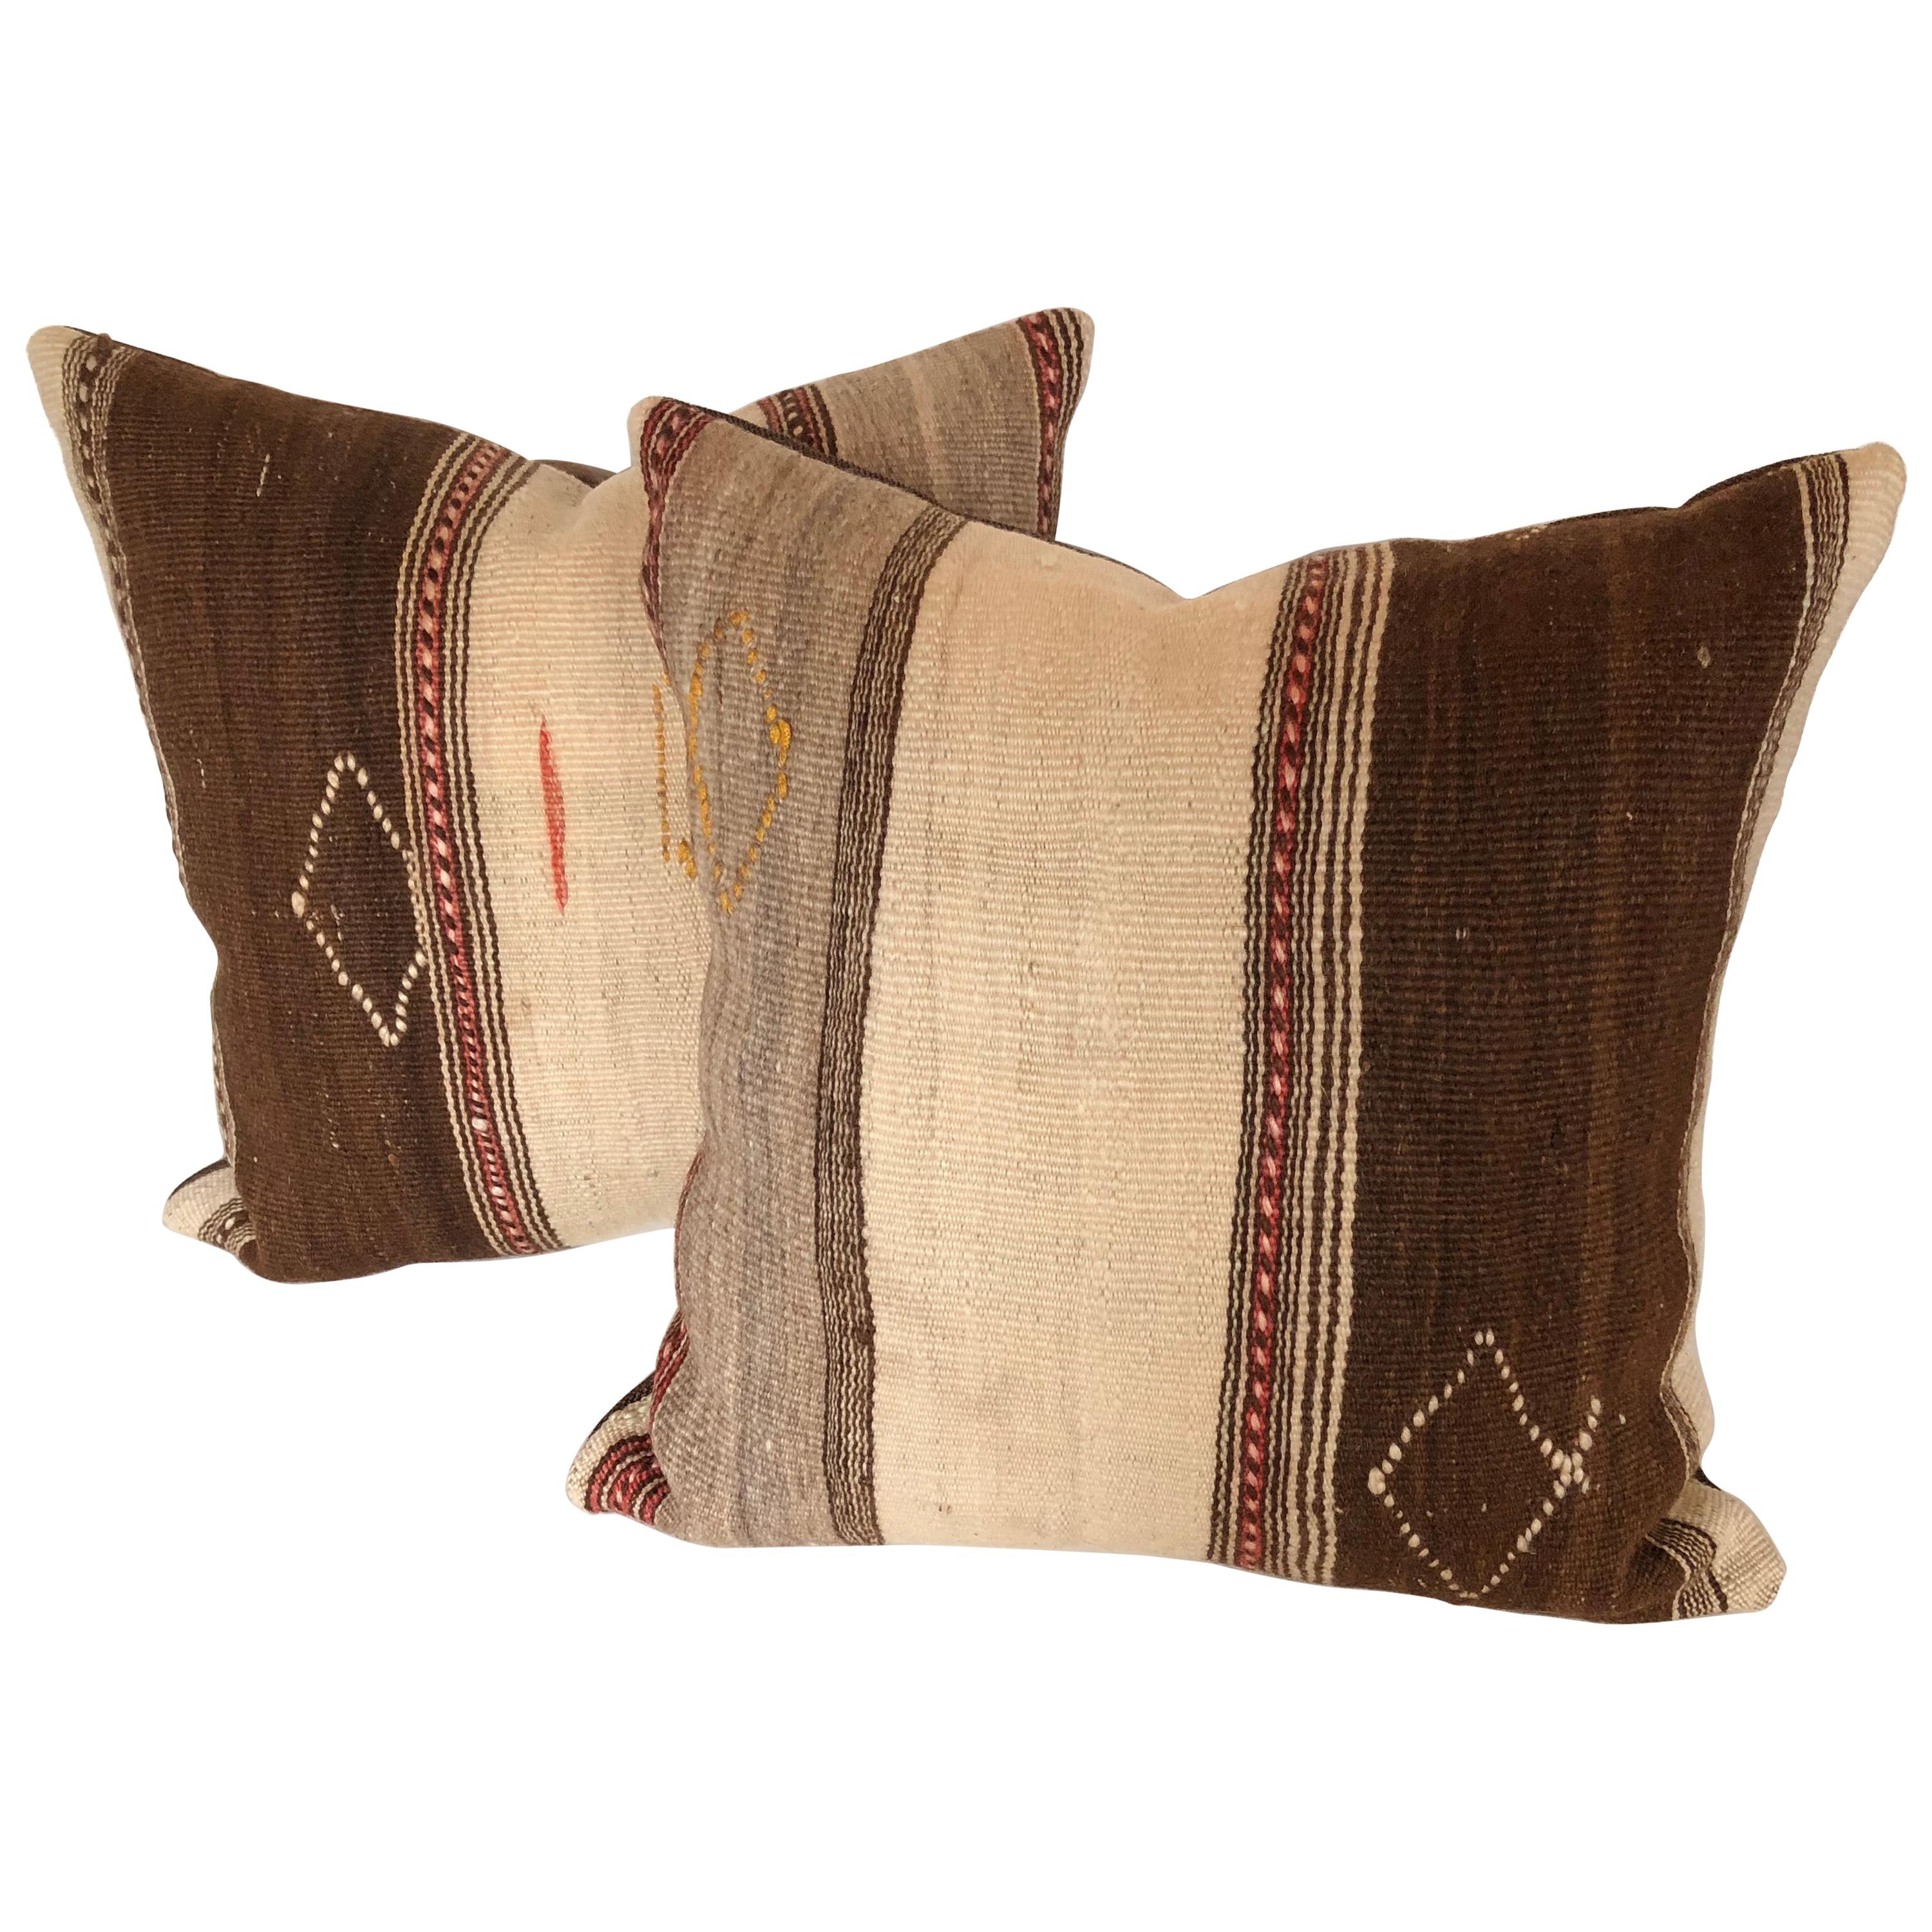 Custom Pillows Cut from a Vintage Moroccan Wool Ourika Rug, Atlas Mountains